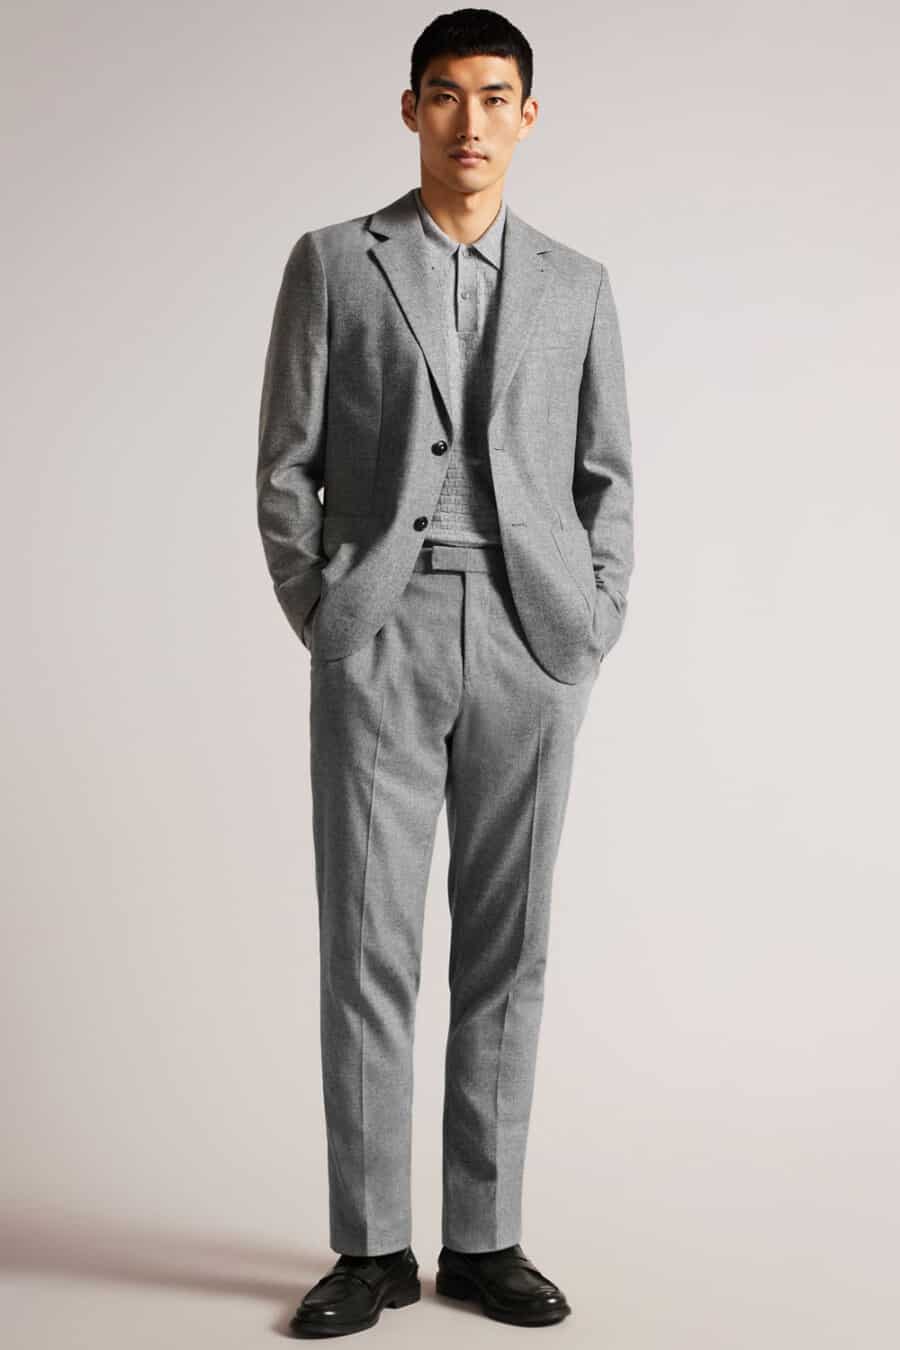 Men's grey suit, grey knitted long-sleeve polo shirt and black leather penny loafers outfit